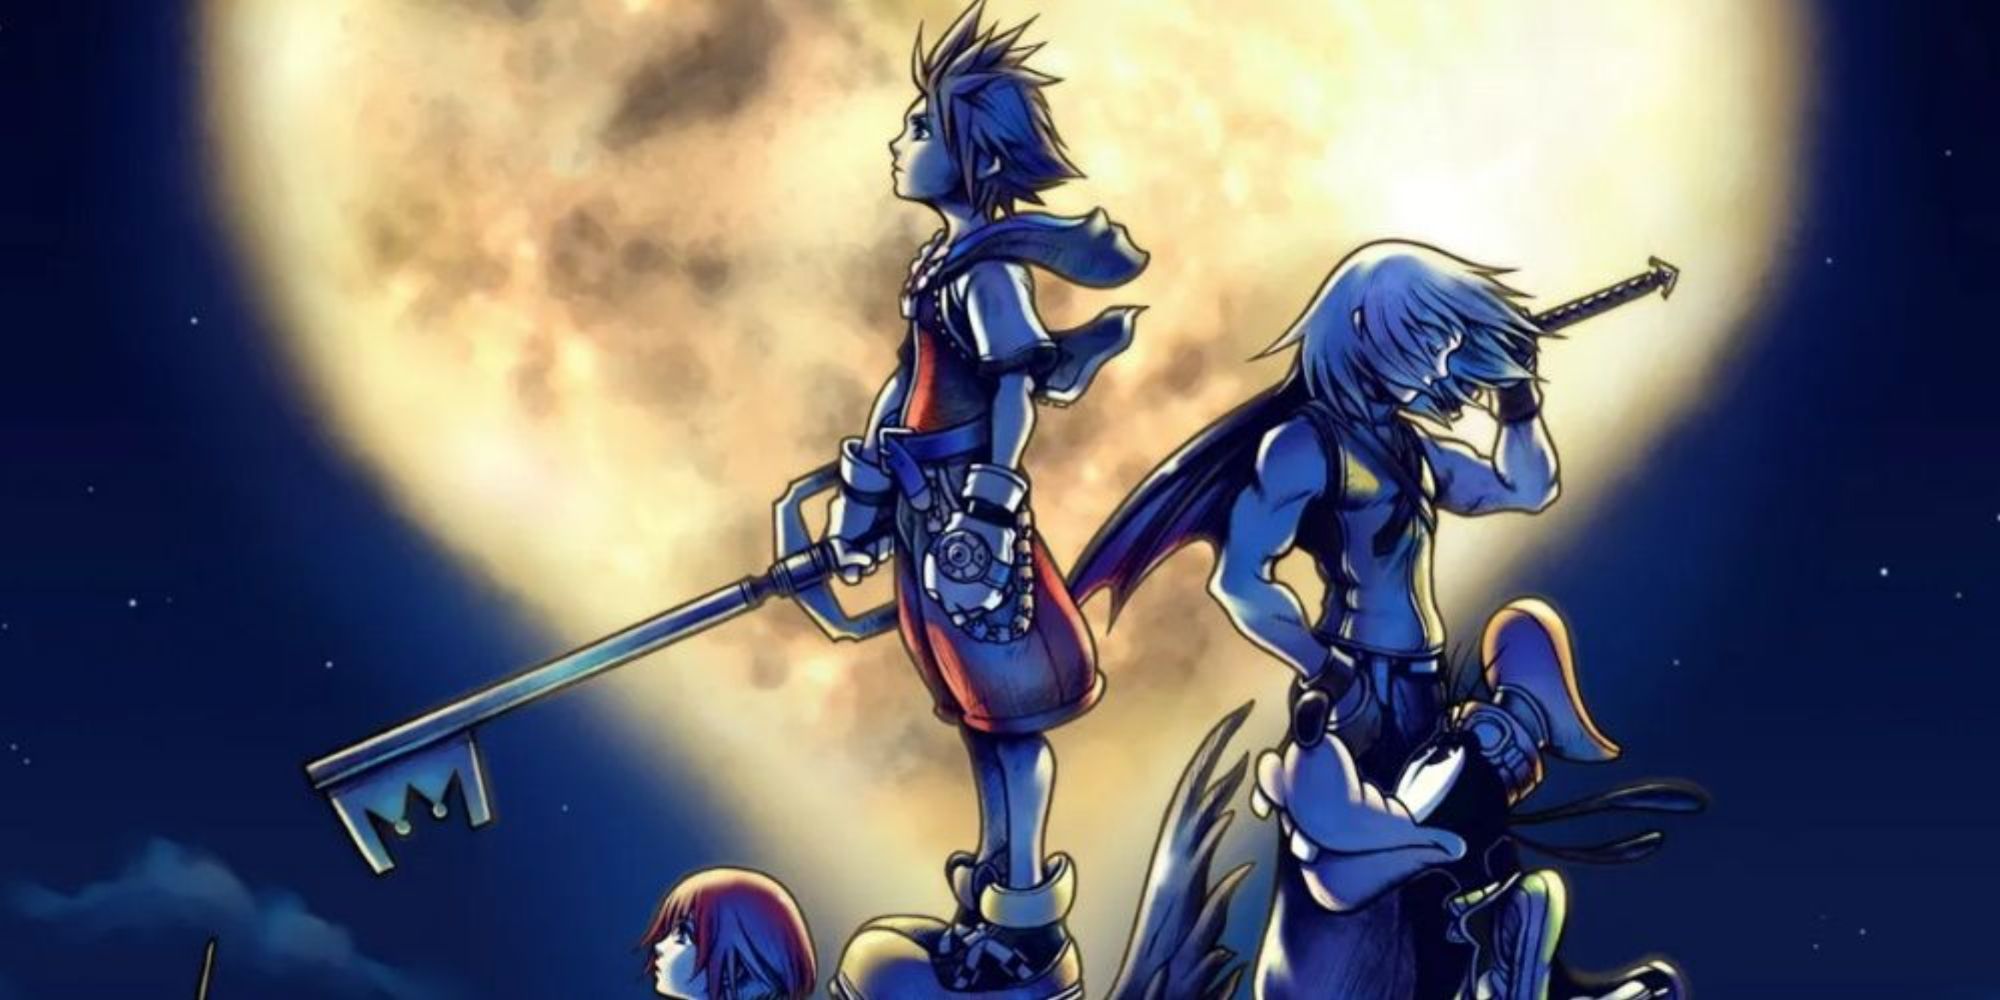 Box Art for Kingdom Hearts showing Sora, Riku and Goofy in front of Kingdom Hearts in the night sky.